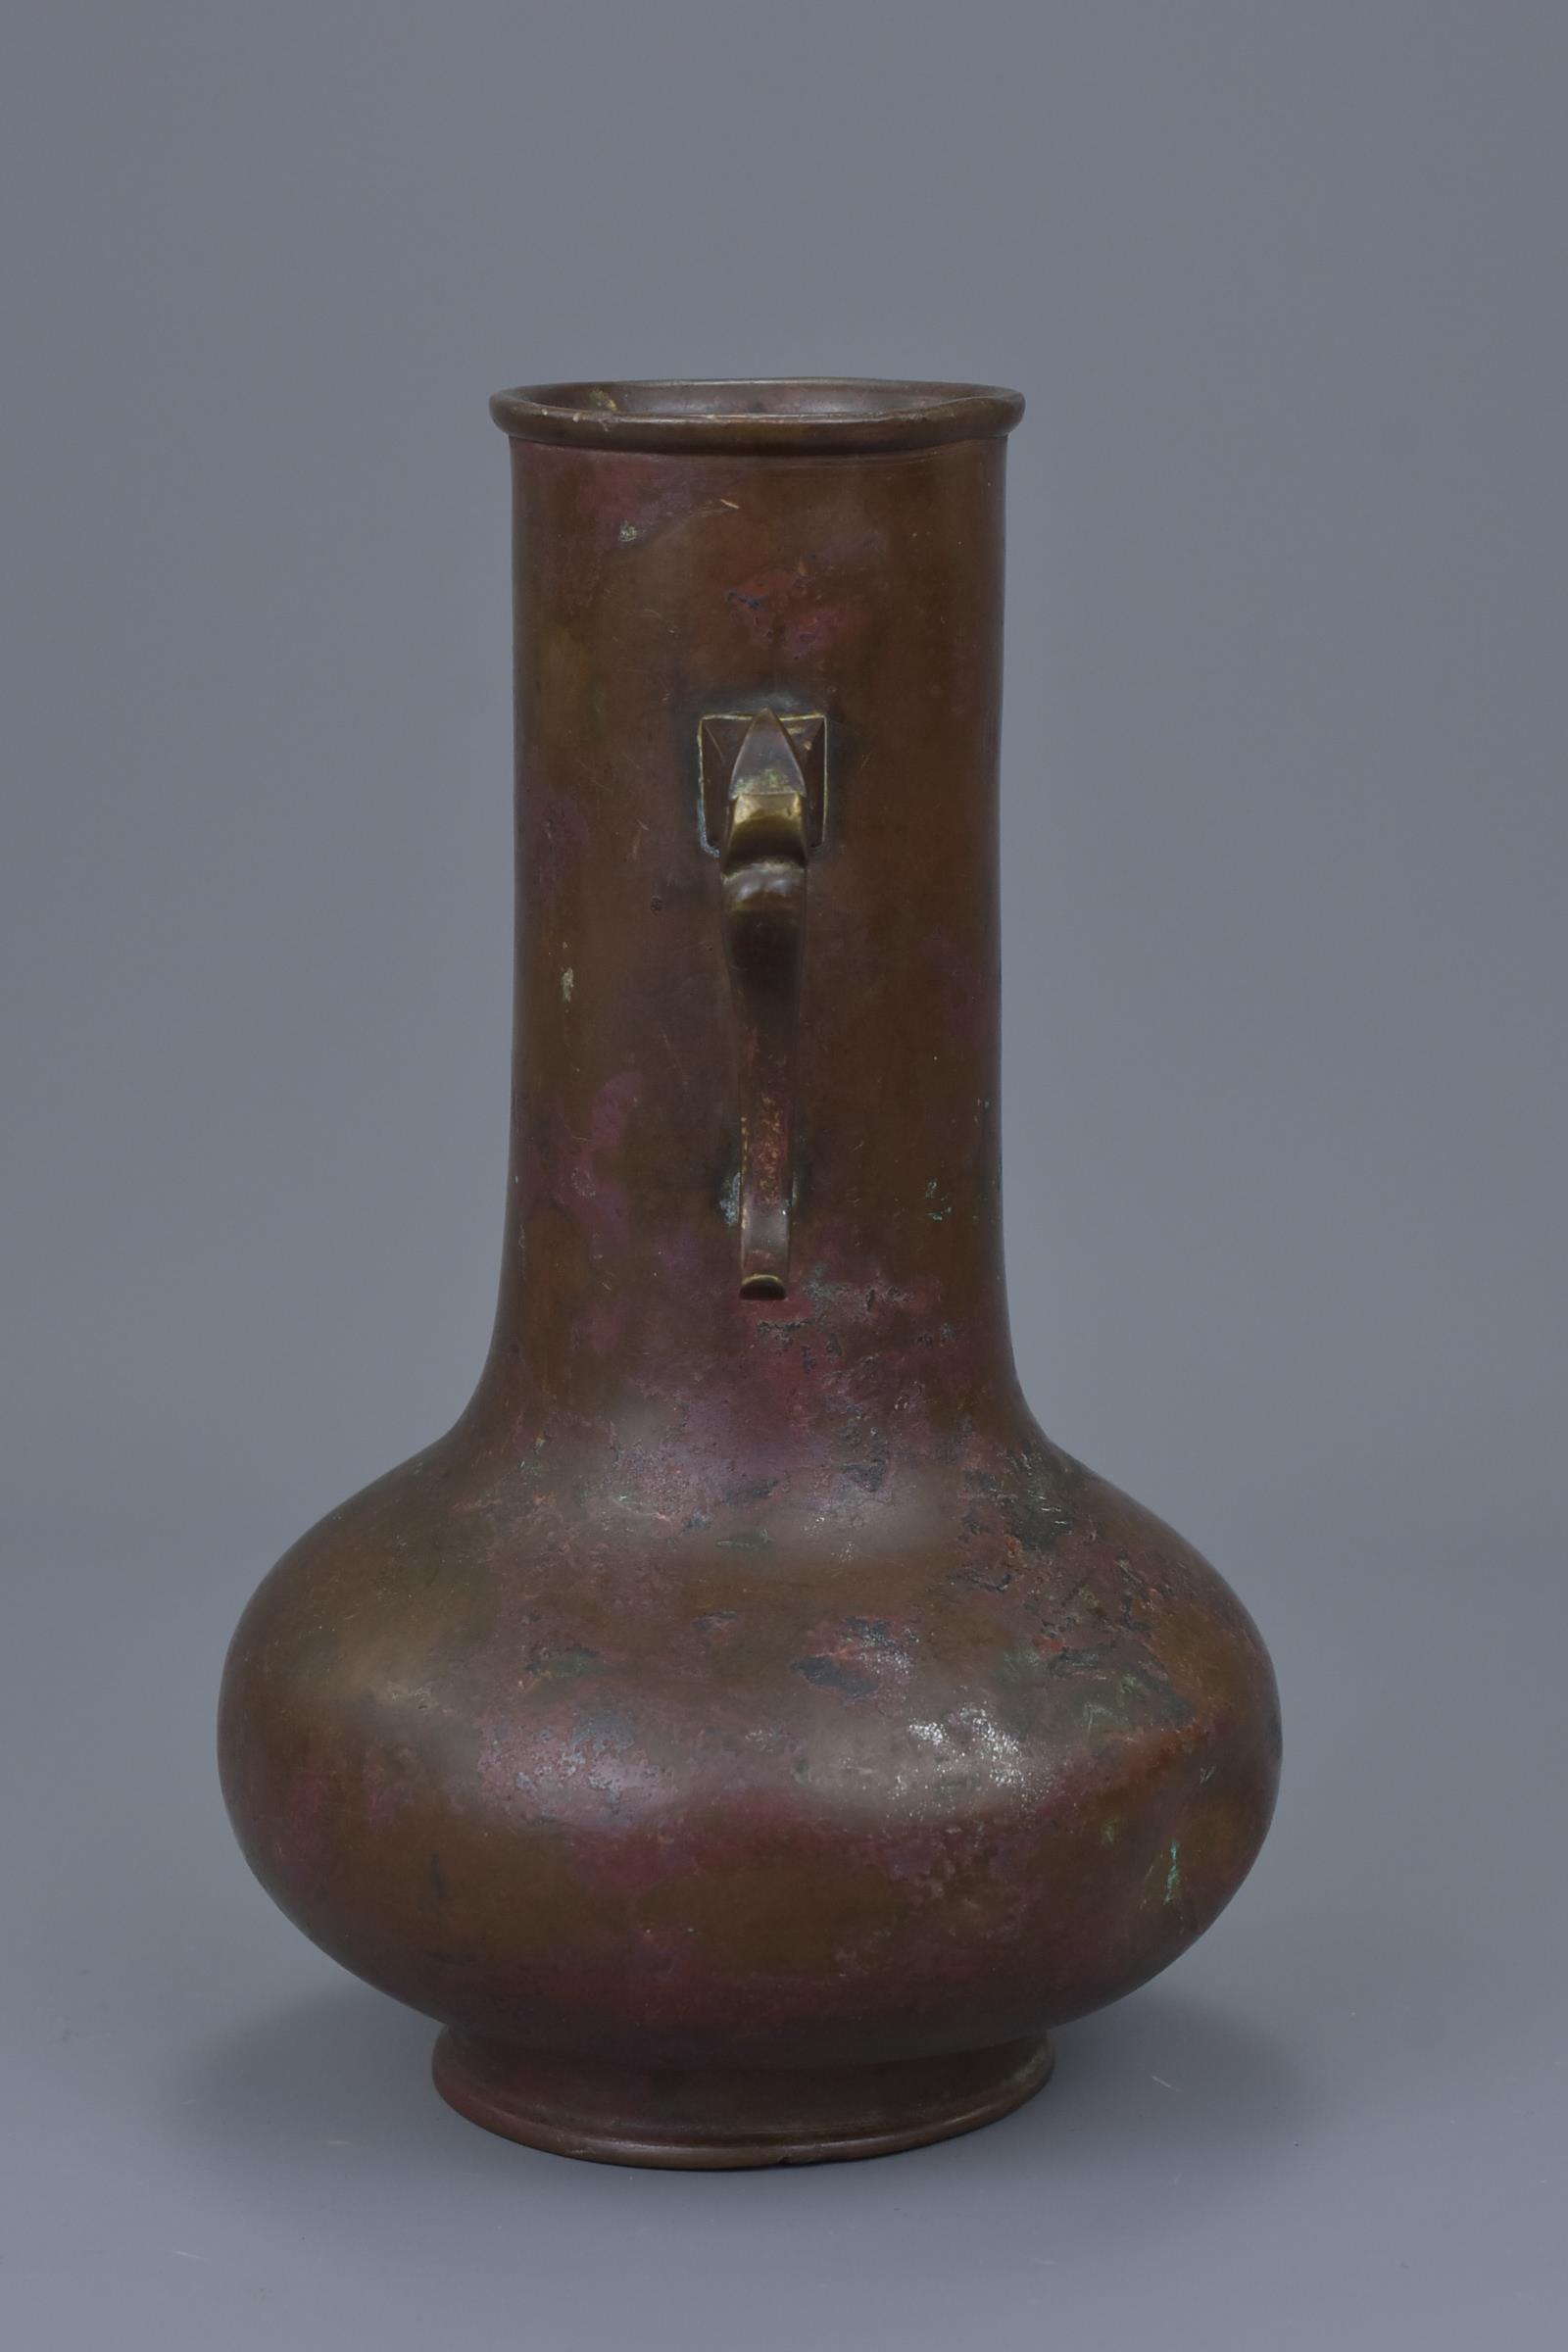 A Chinese 18th C. or earlier bronze vase - Image 4 of 7